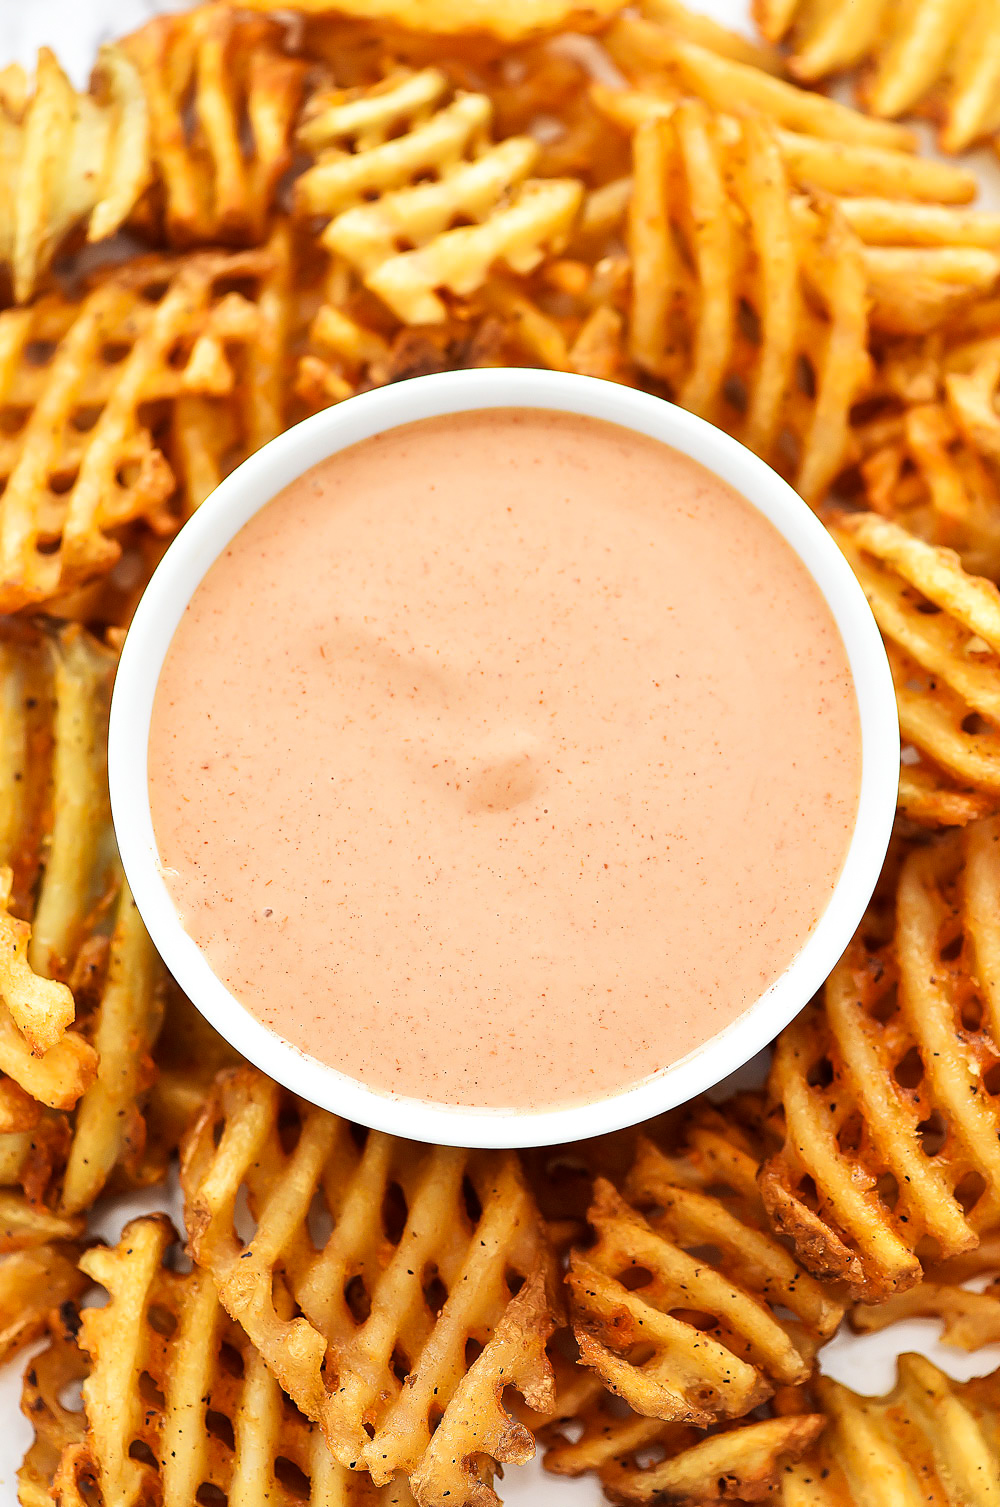 Utah Fry sauce is a French fry sauce made with ketchup, mayonnaise and other spices. Life-in-the-Lofthouse.com